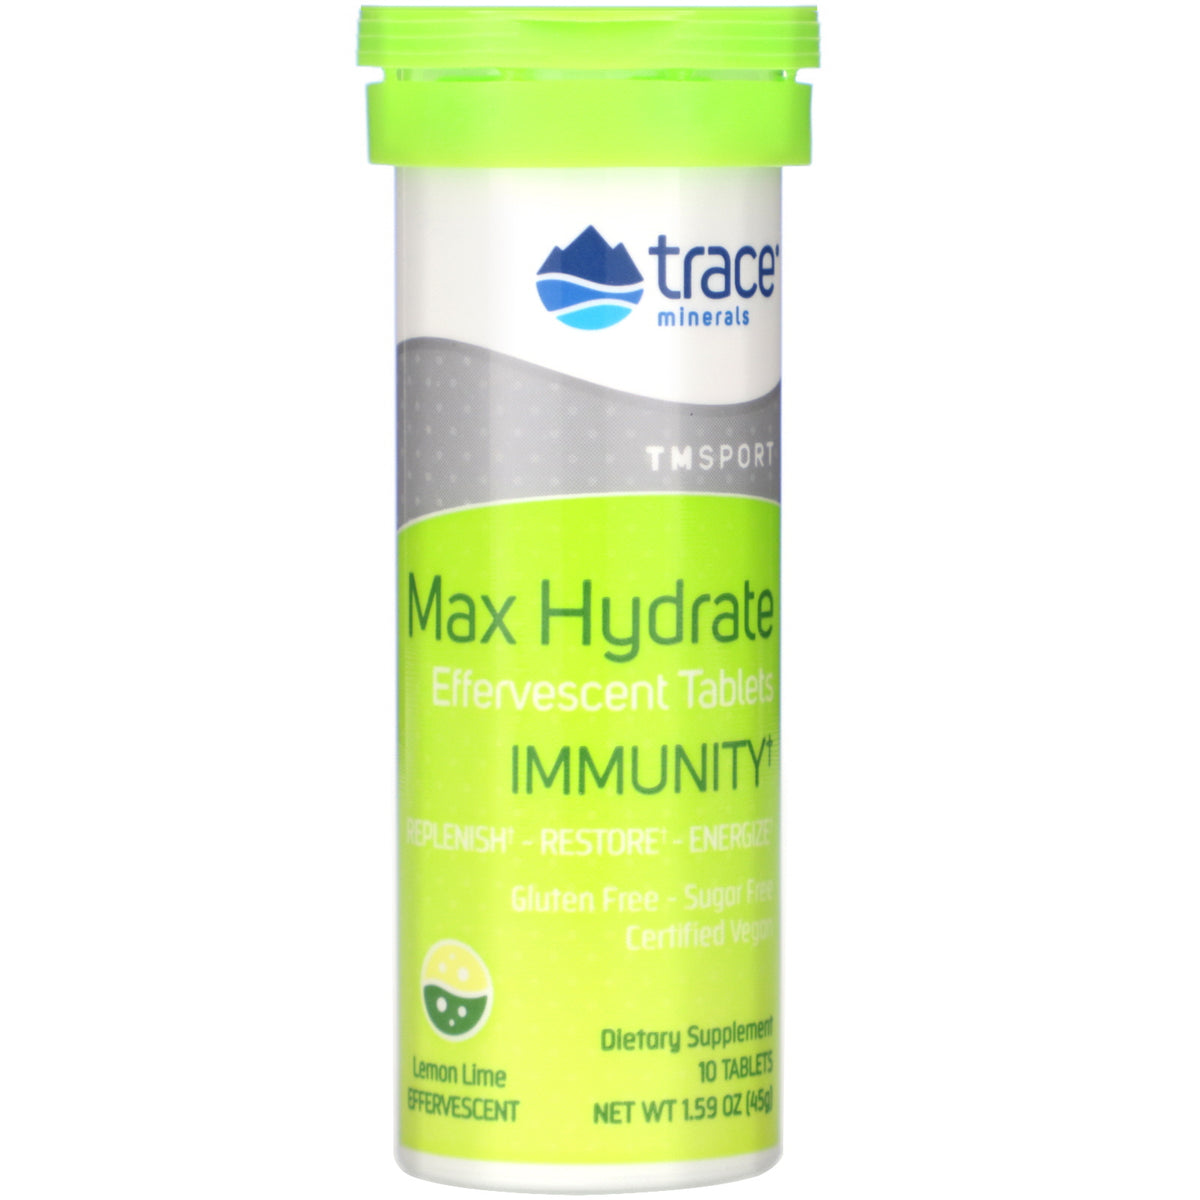 Maxhydrate immunity Effervescent Tablets - Trace Minerals